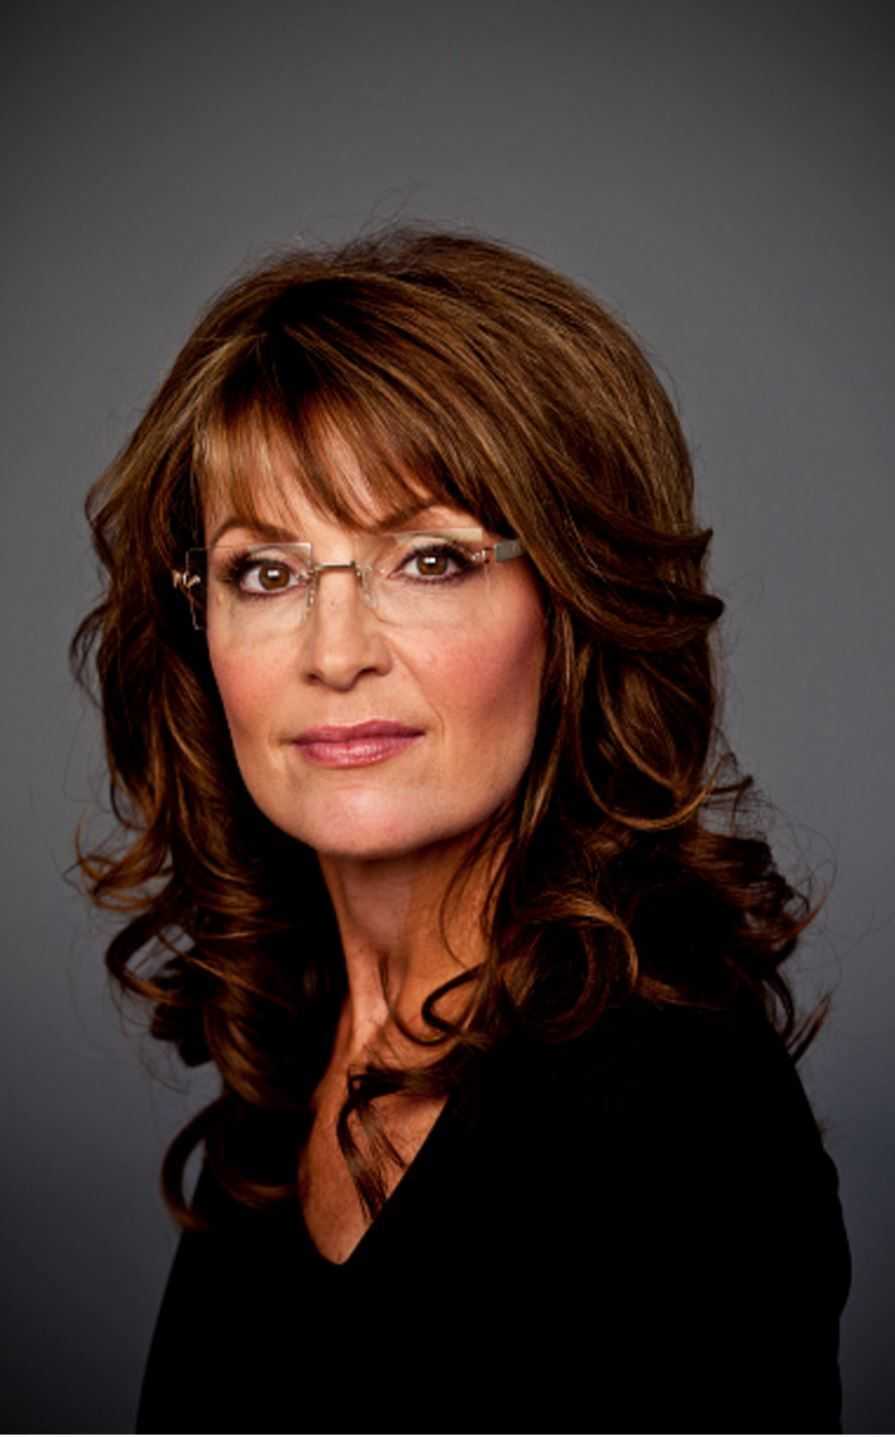 70+ Hot Pictures Of Sarah Palin Are Sexy As Hell 4